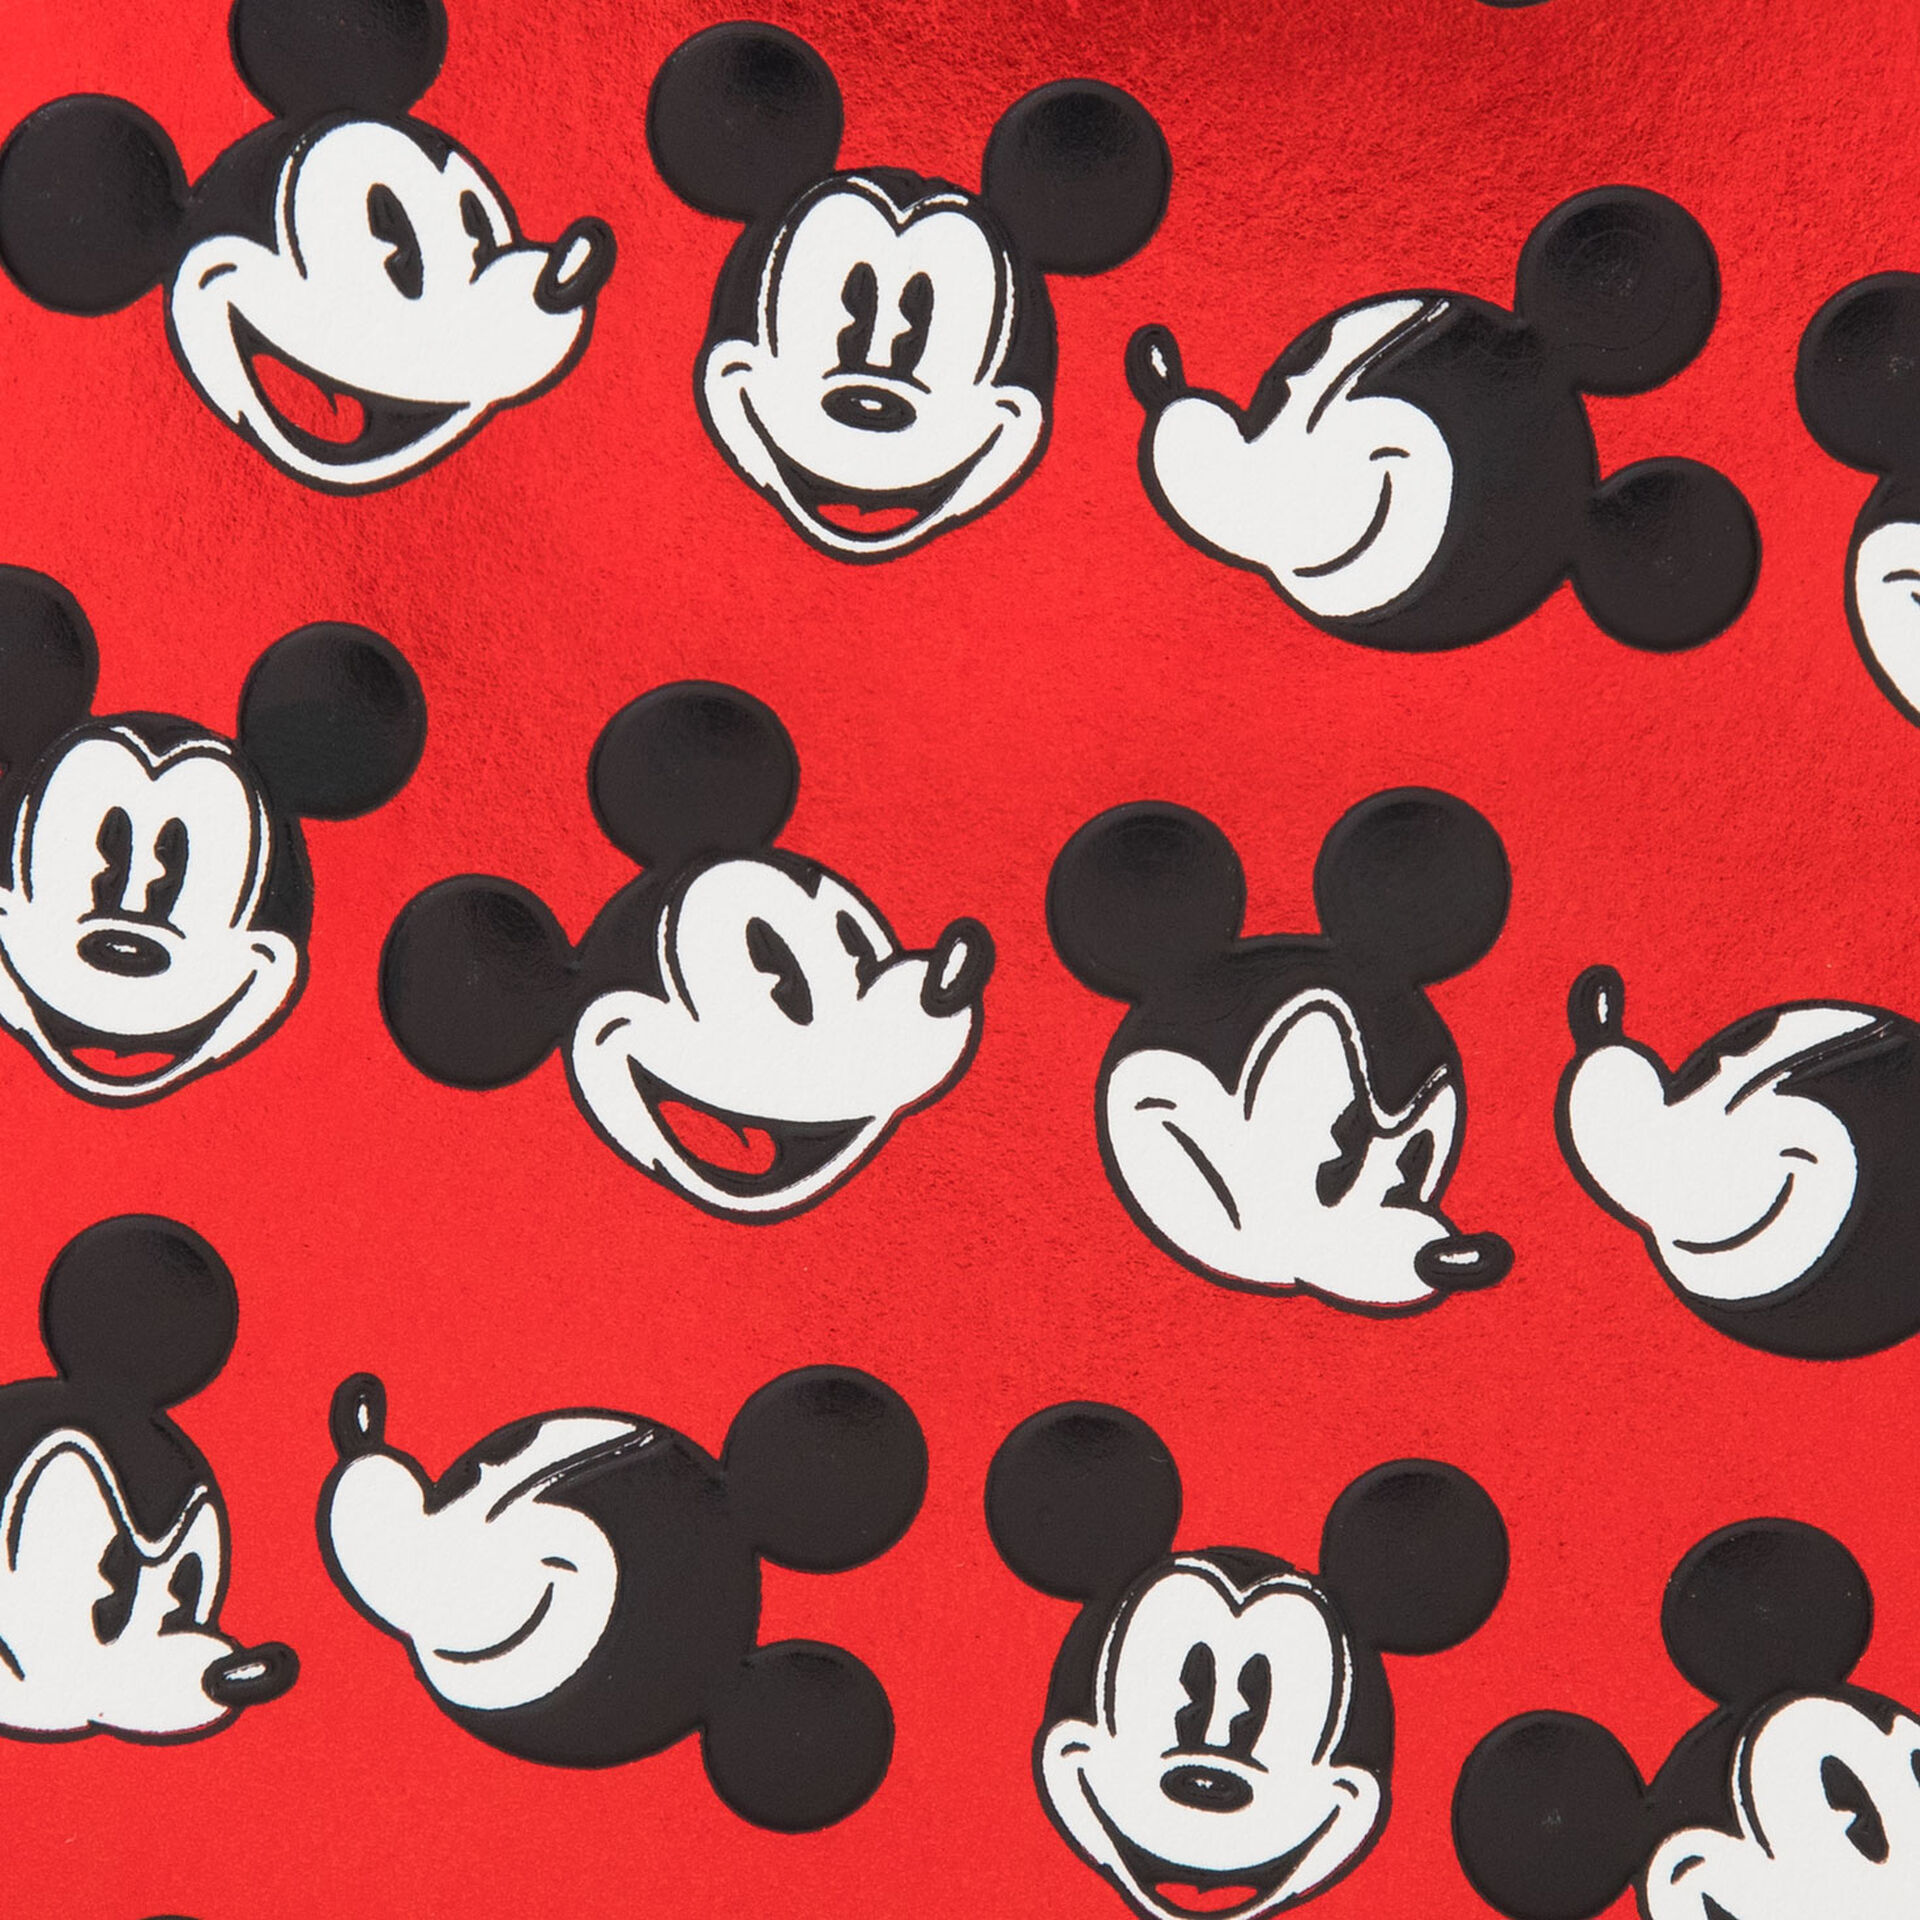 Disney-Mickey-Mouse-Faces-Blank-Card_399F1153_03